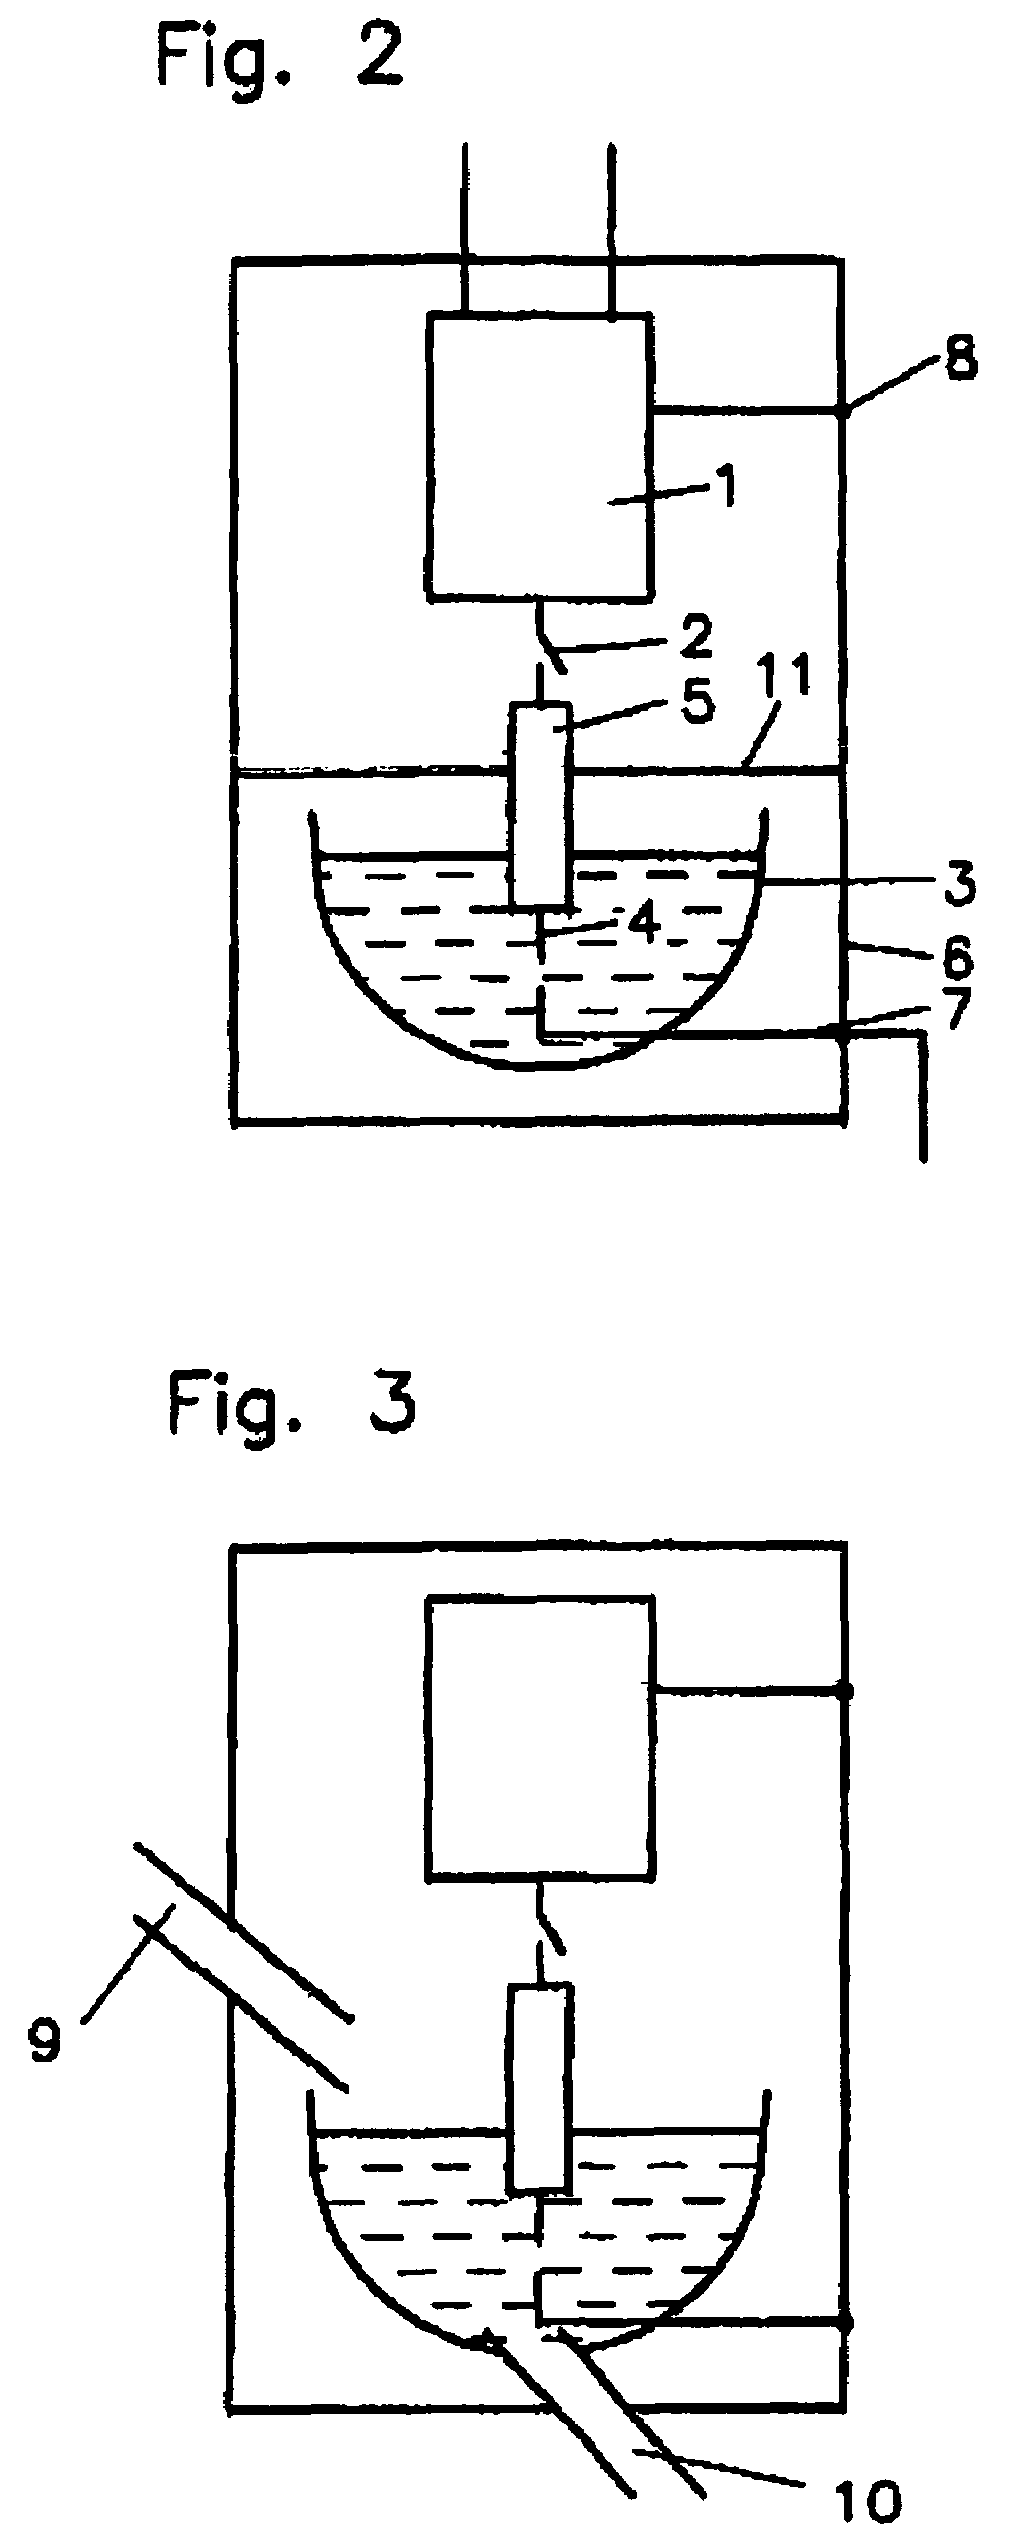 Assembly of an electrodynamic fractionating unit